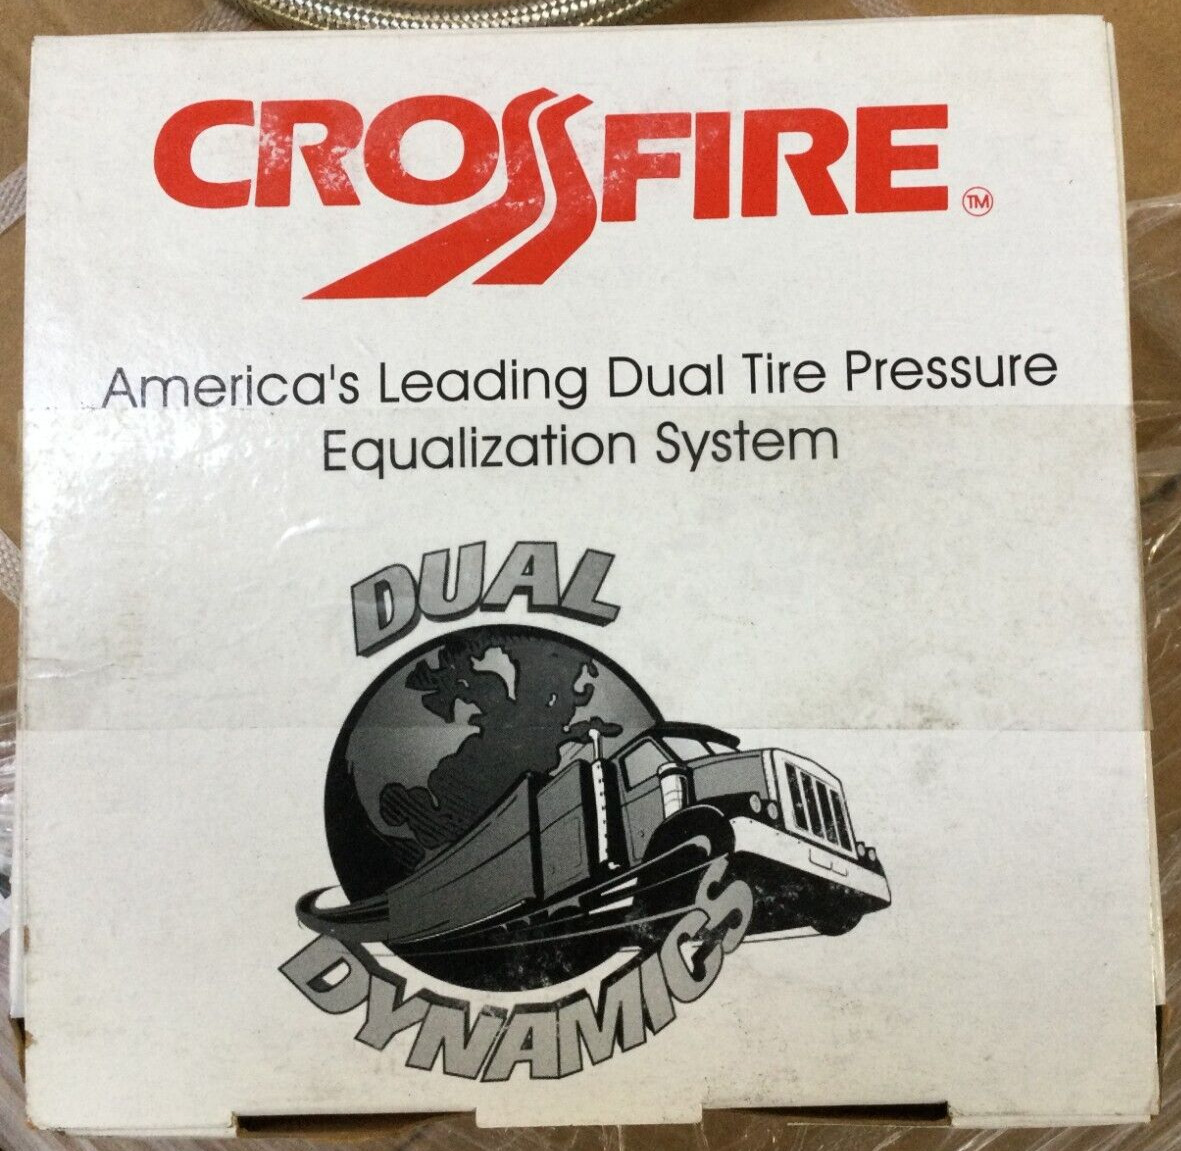 Crossfire CF105STABT Dual Tire Pressure Equalization System, 105 PSI, one per pk